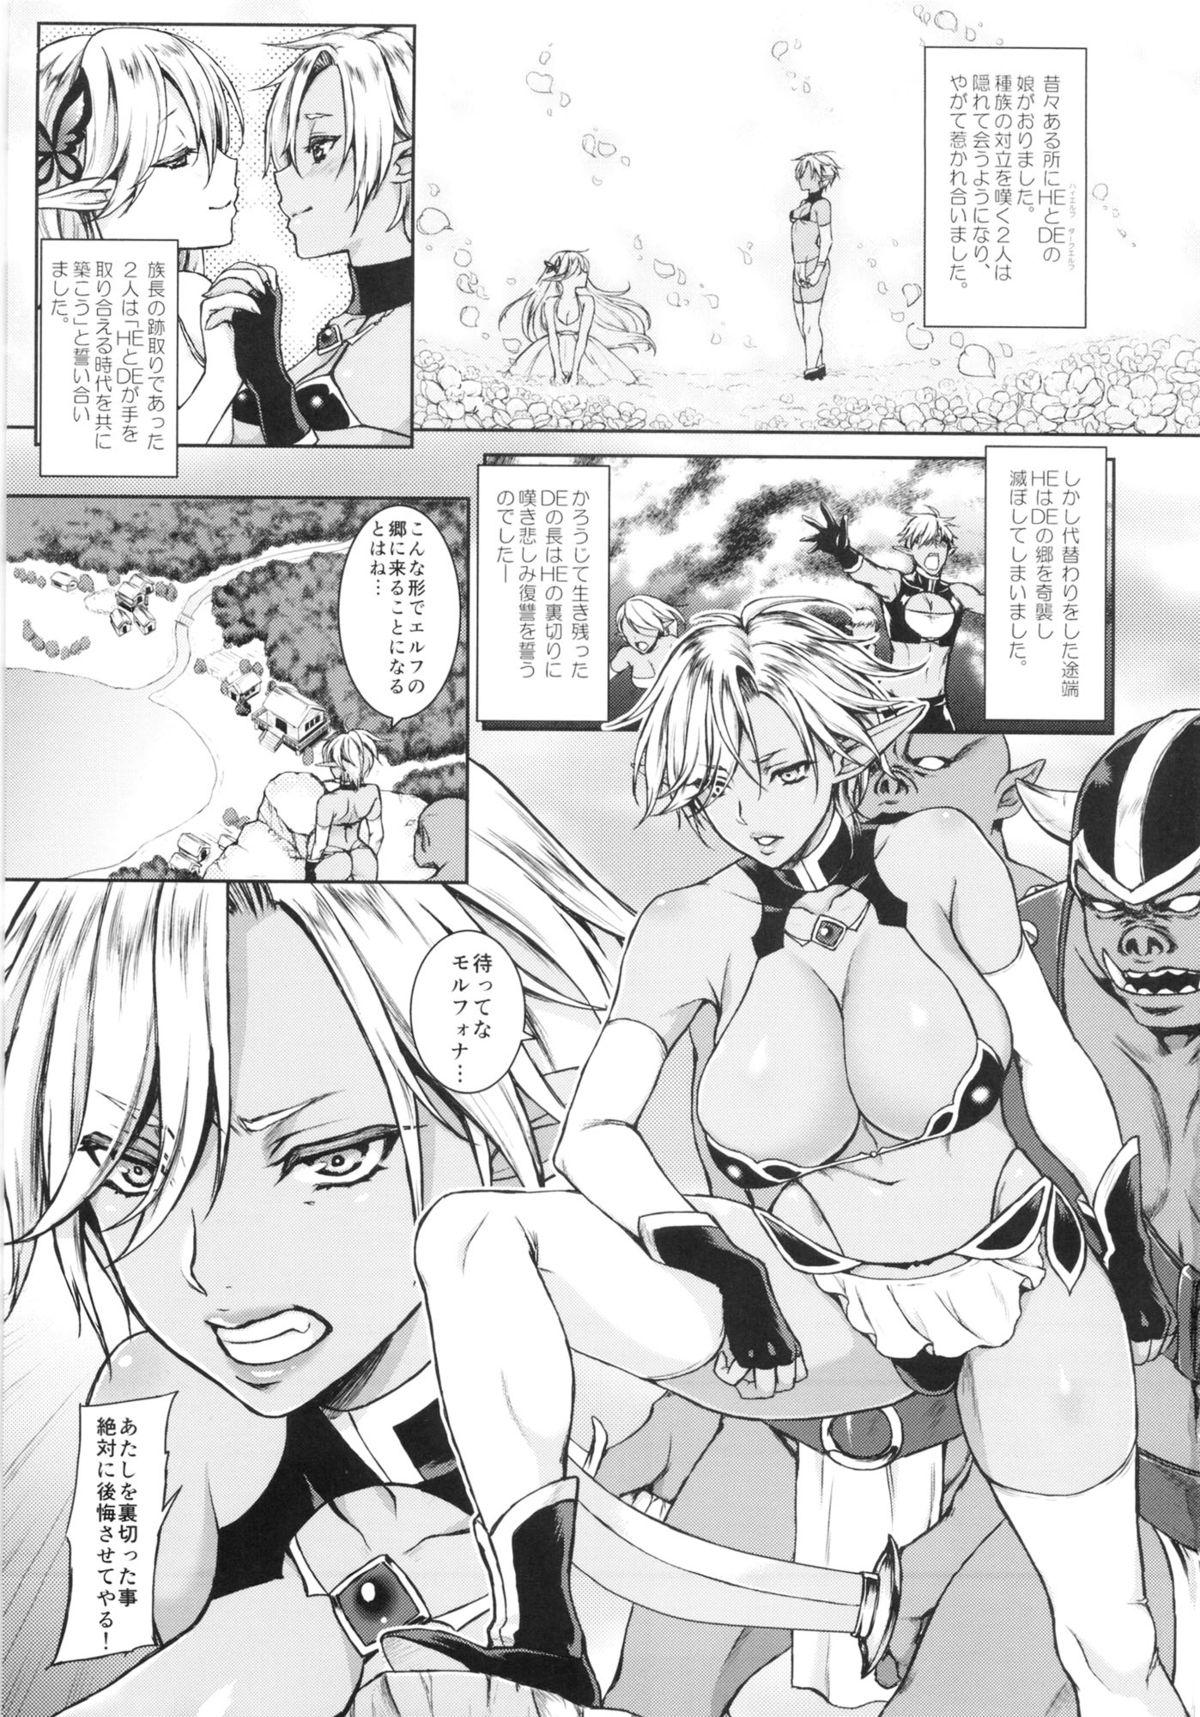 Transsexual Kyouchou no Yume - The dream of mad morpho butterflies. Verification - Page 2